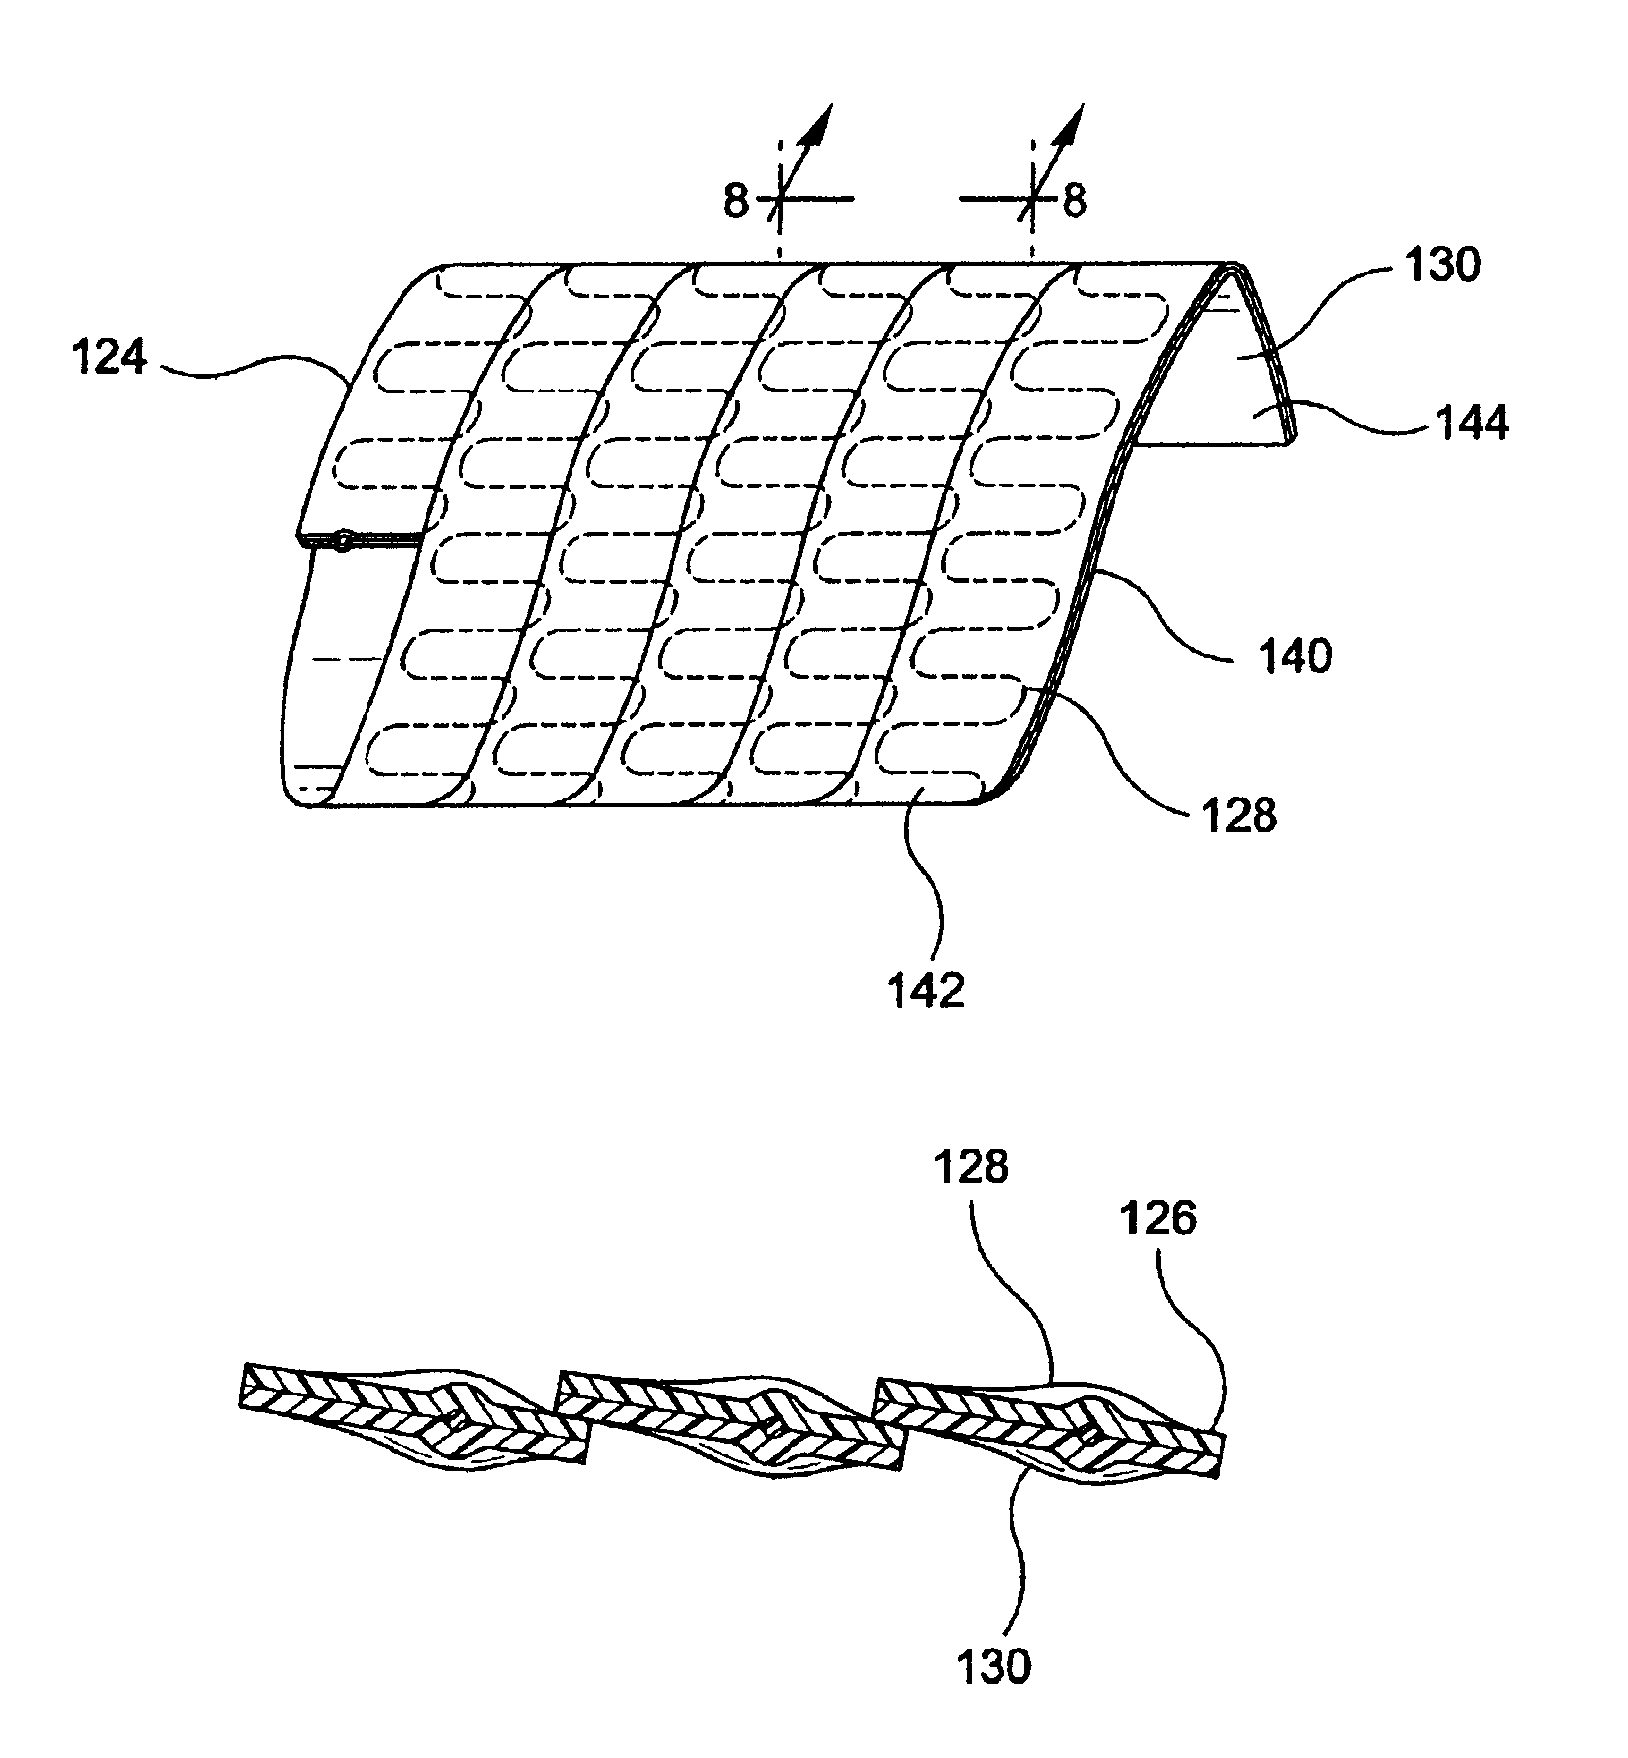 Helically formed stent/graft assembly